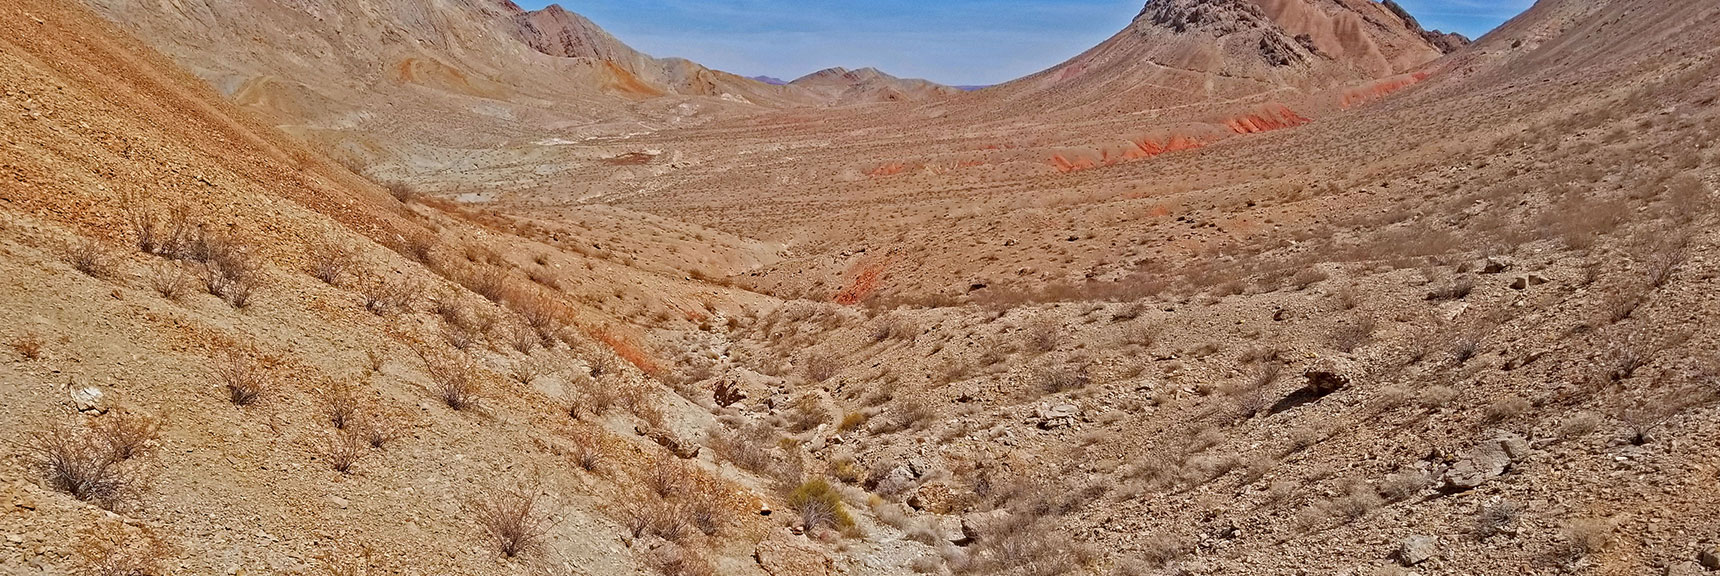 Heading Down from the Saddle into the Valley at the Base of Sunrise Mountain | Sunrise Mountain, Las Vegas, Nevada